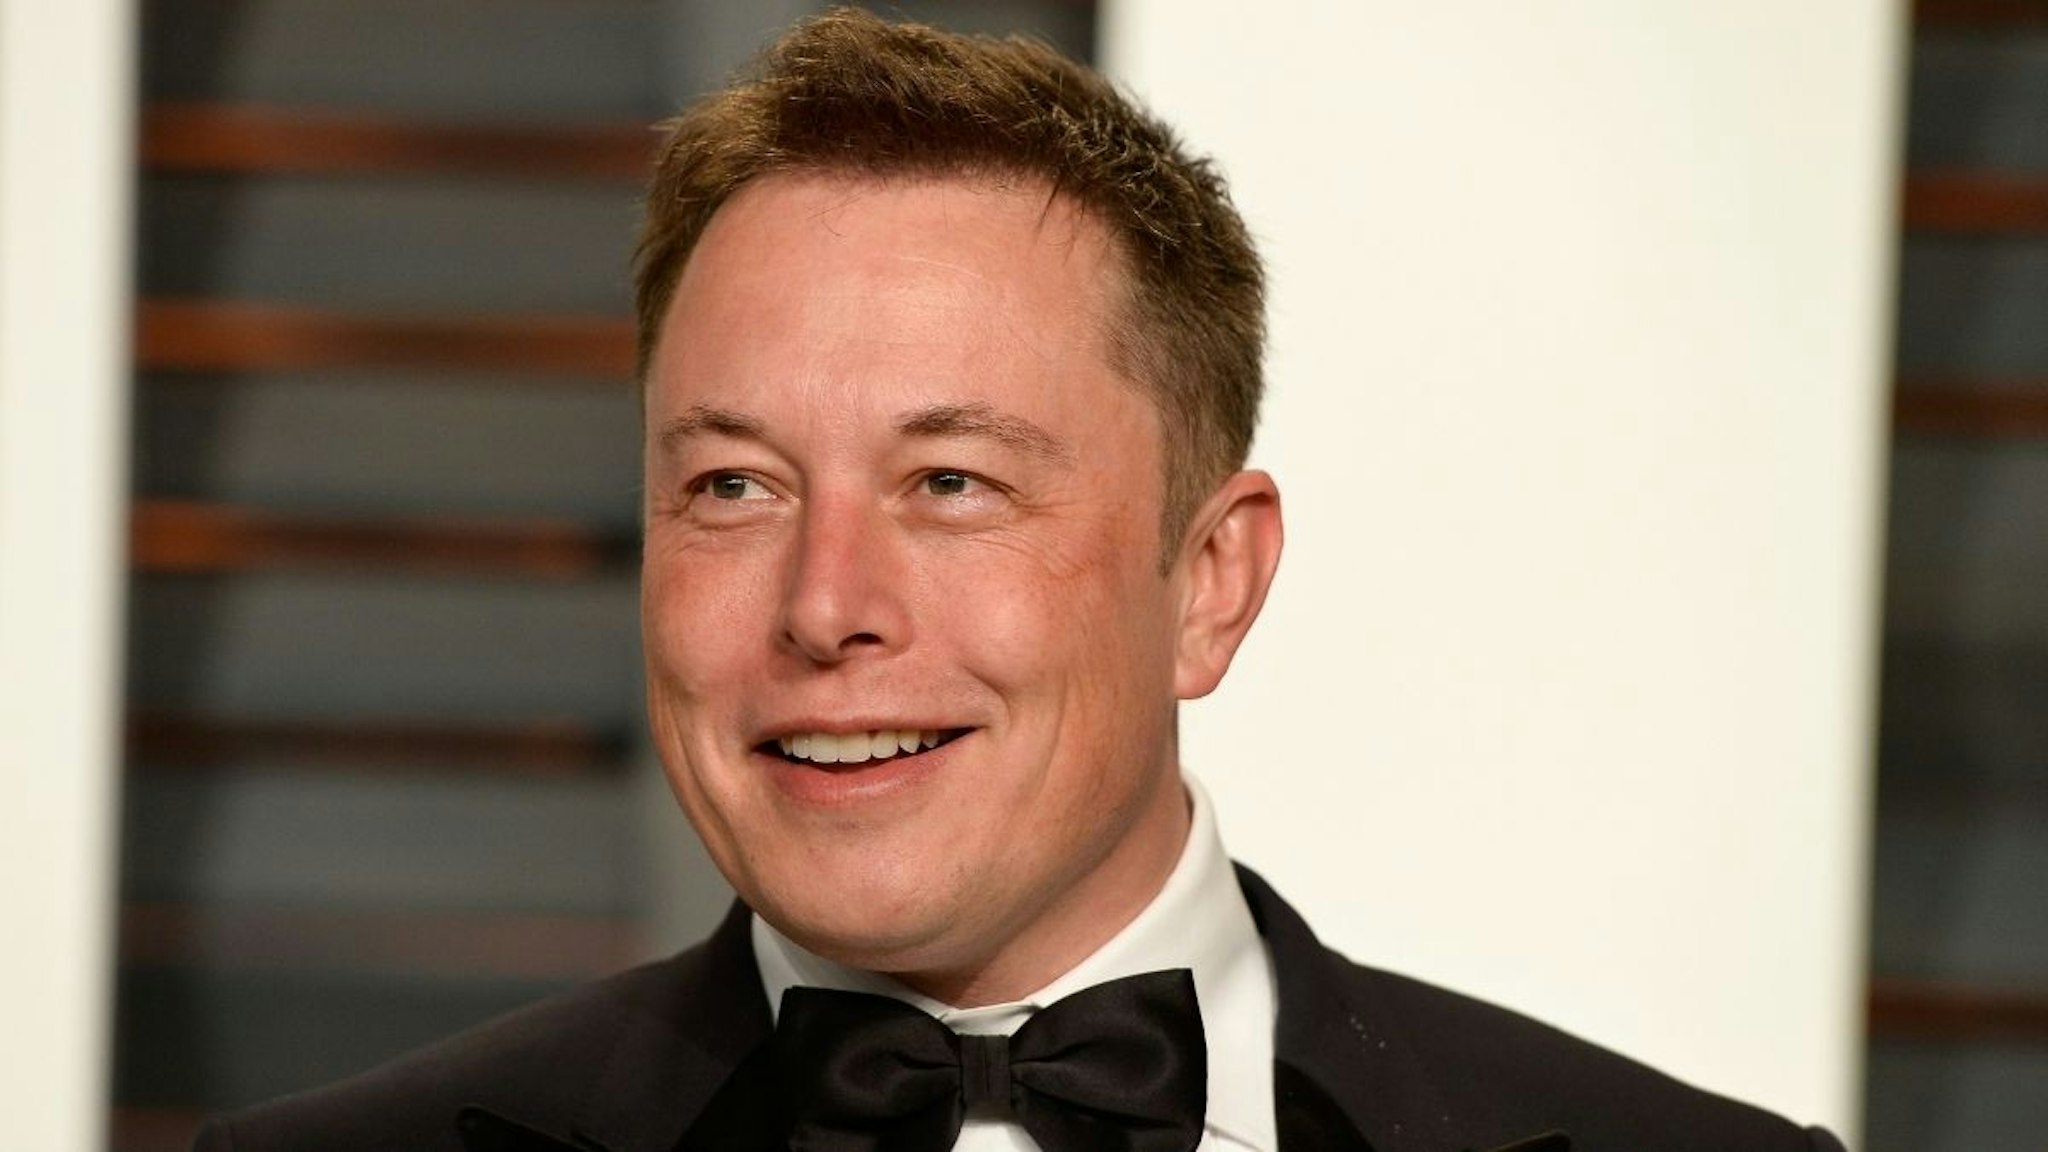 CEO of Tesla and Space X Elon Musk attends the 2015 Vanity Fair Oscar Party hosted by Graydon Carter at Wallis Annenberg Center for the Performing Arts on February 22, 2015 in Beverly Hills, California.